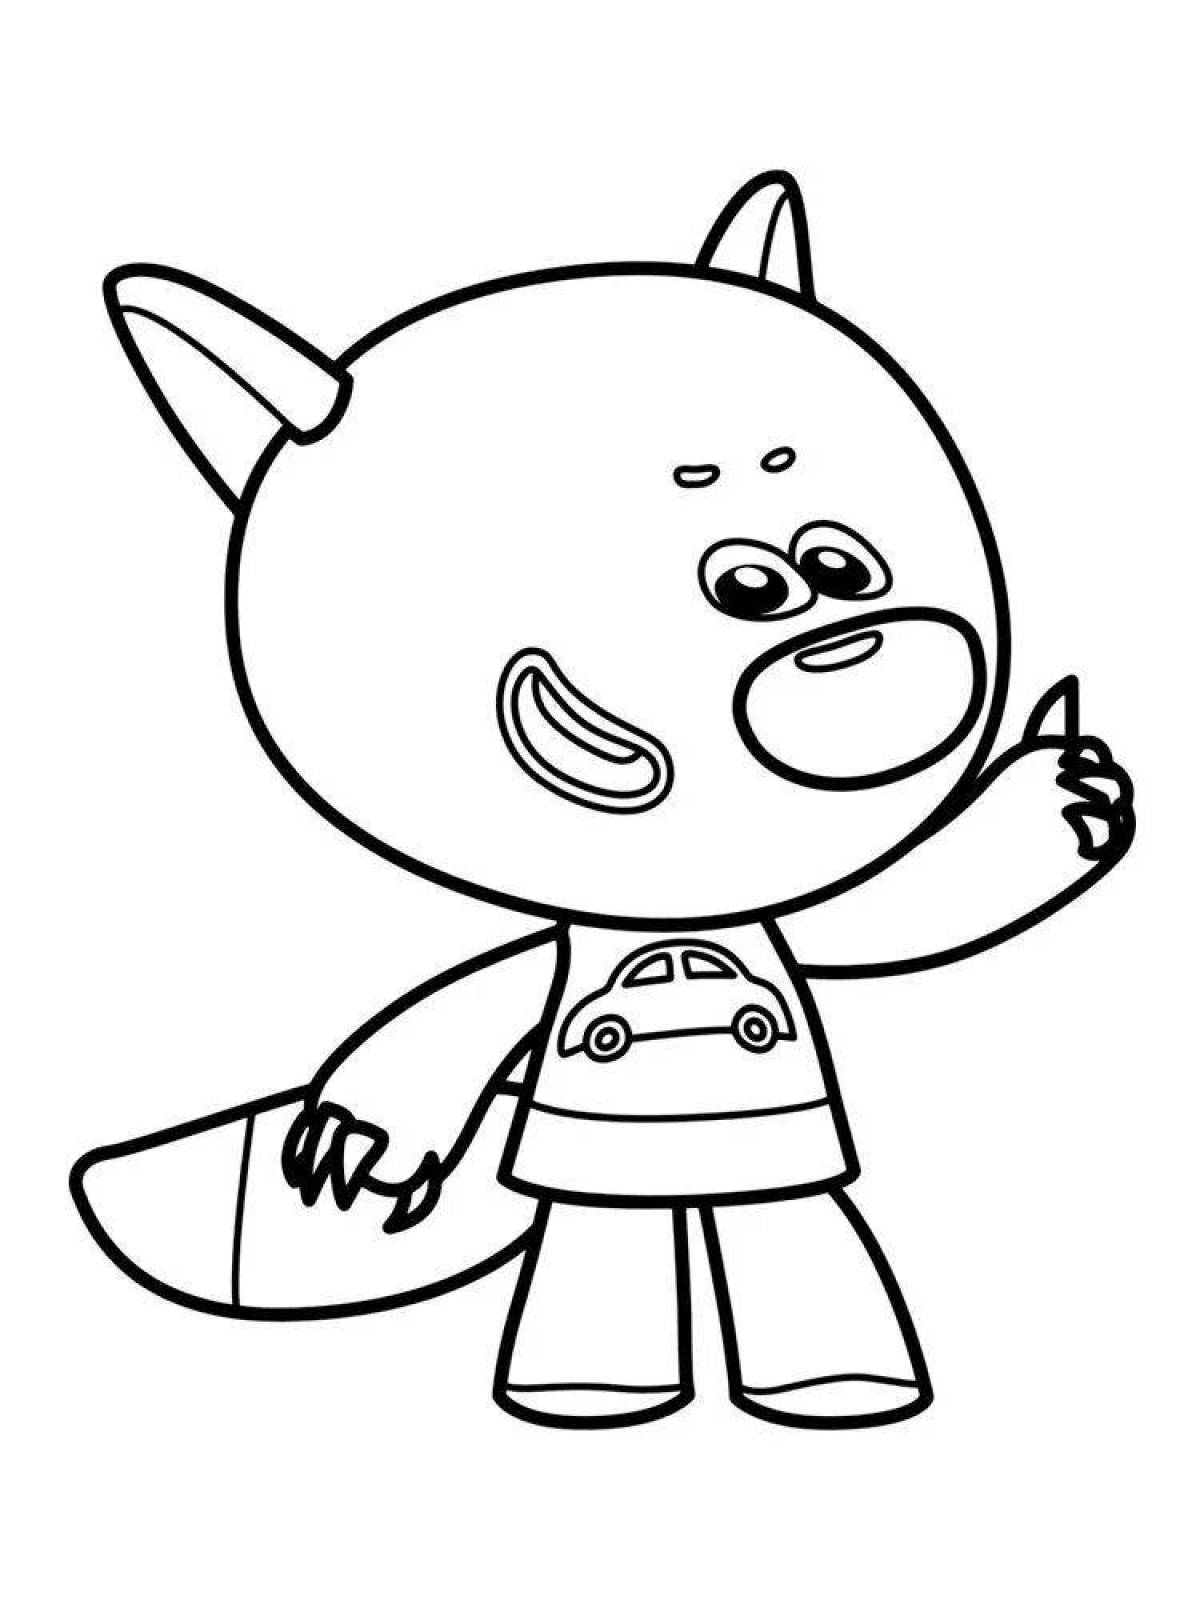 Coloring pages for girls mimimishki